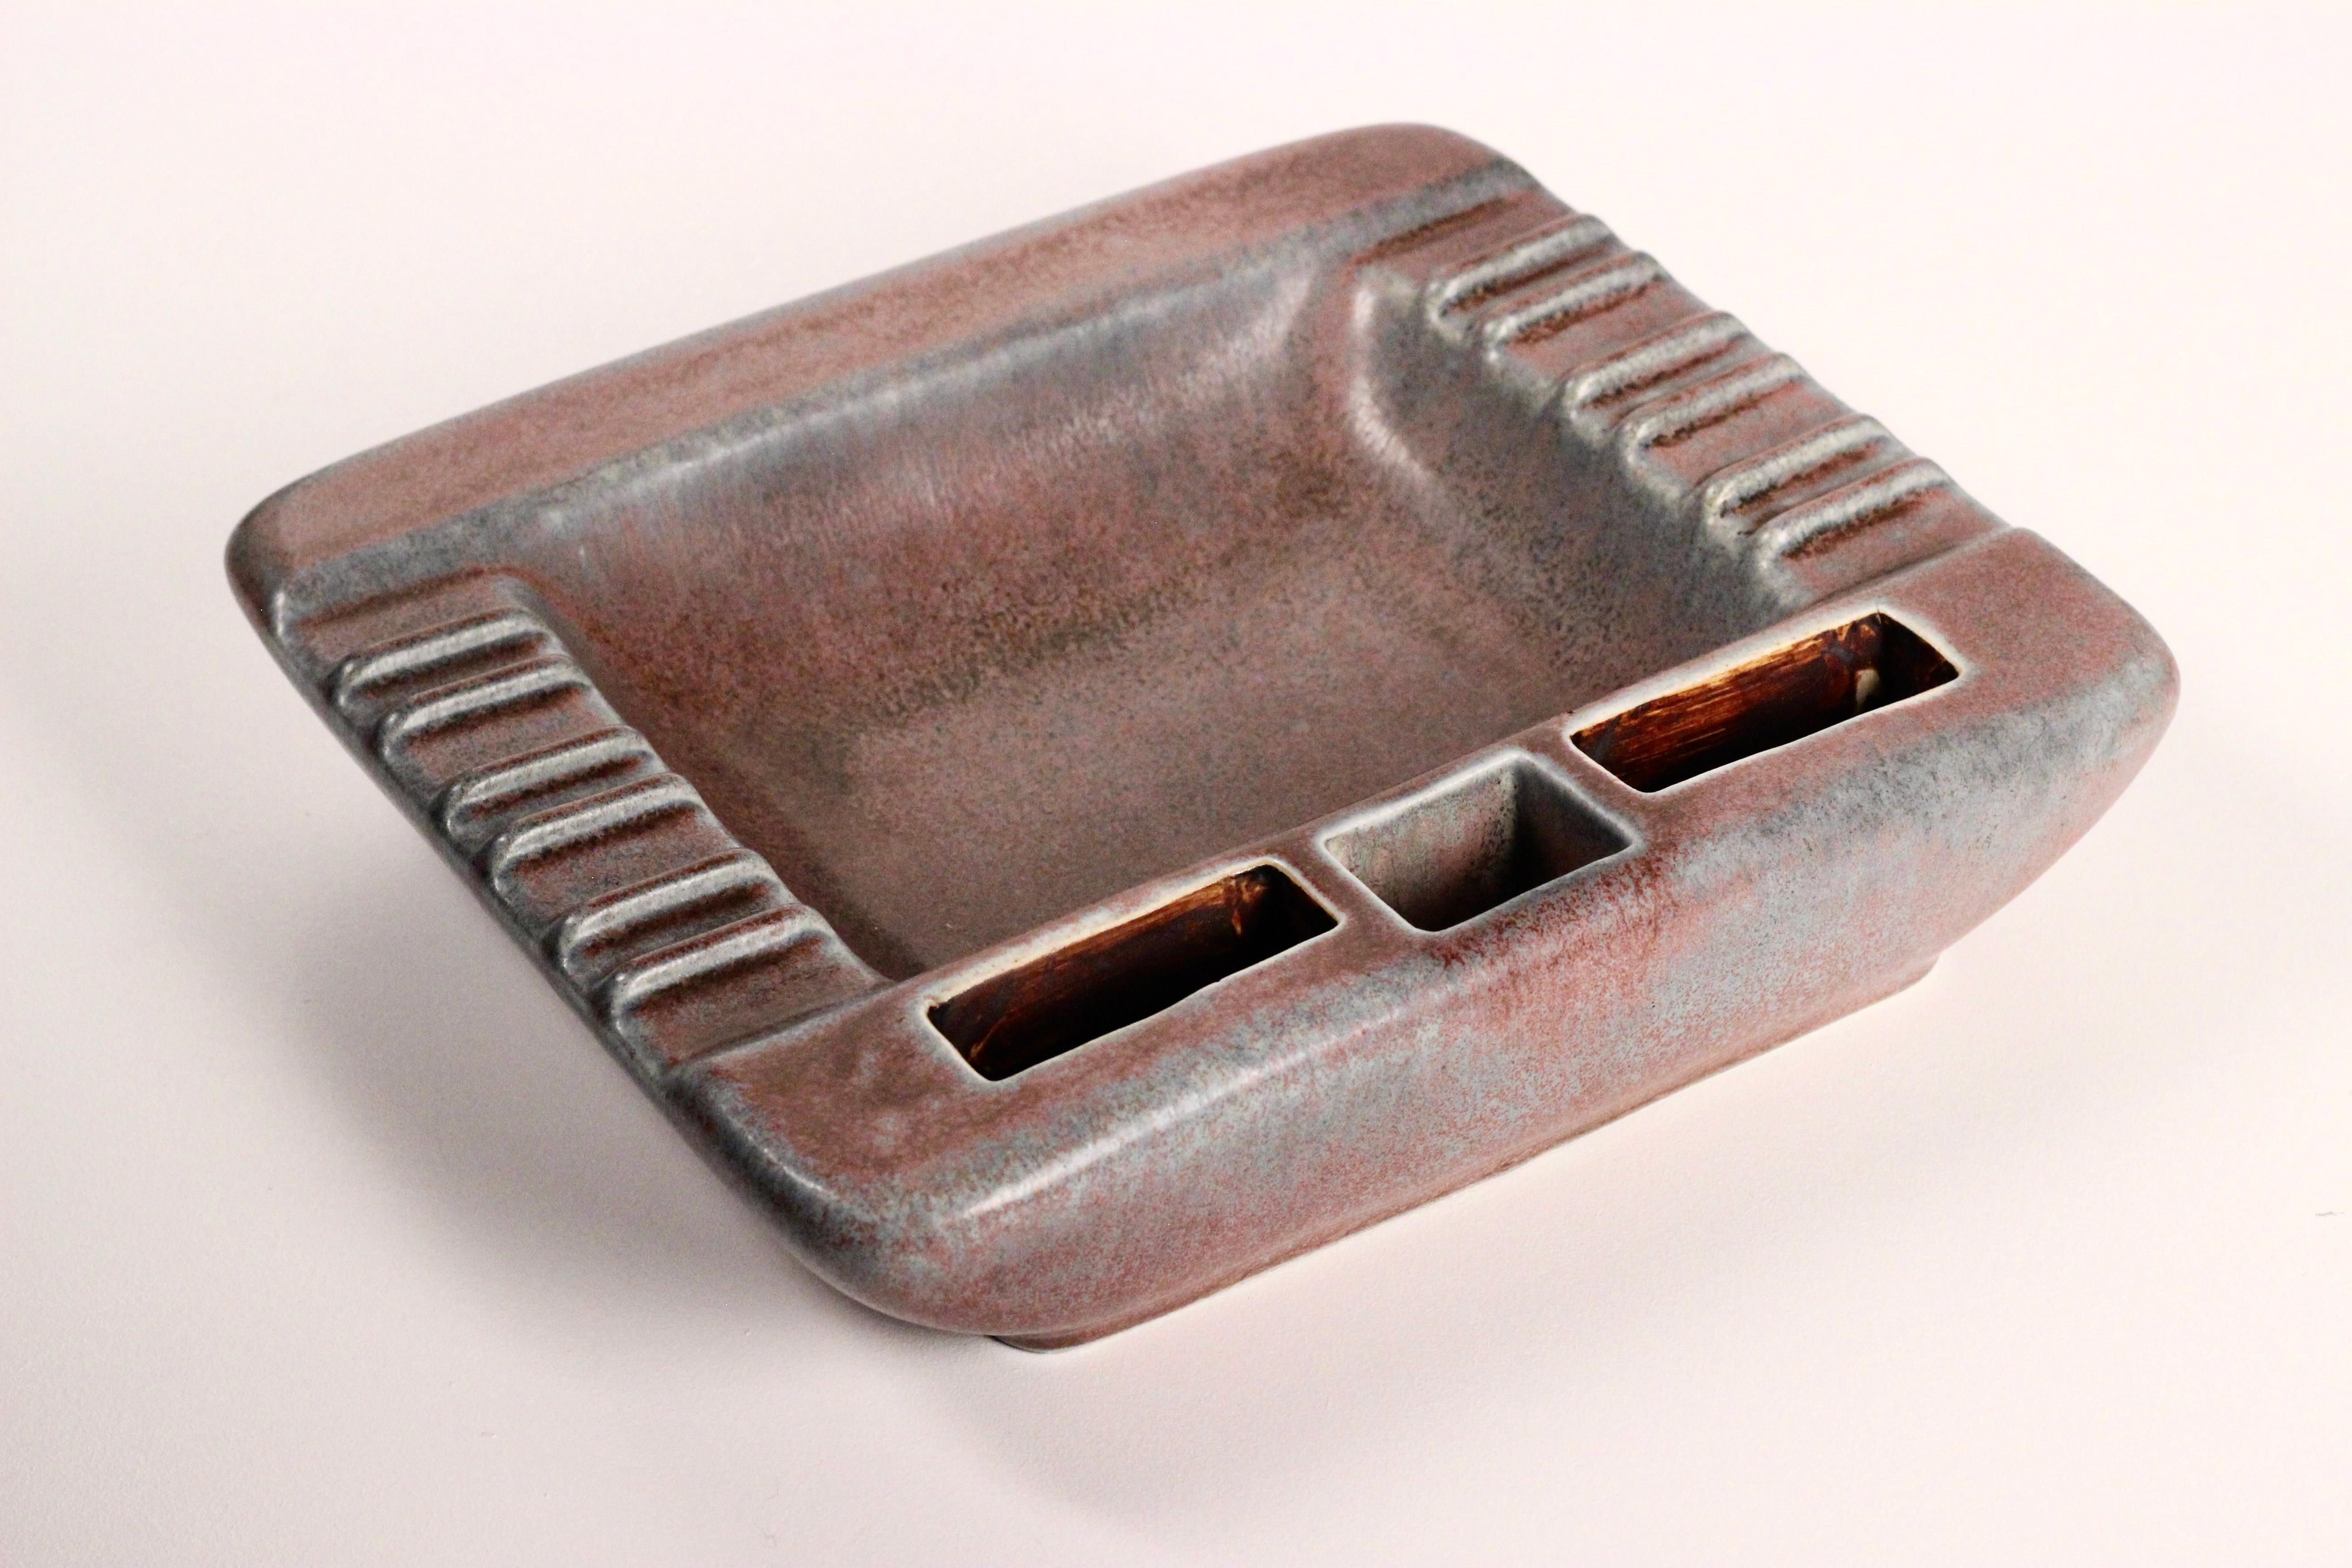  Scandinavian modern large ceramic ashtray by Gunnar Nylund for Rörstrand 1950’s For Sale 2